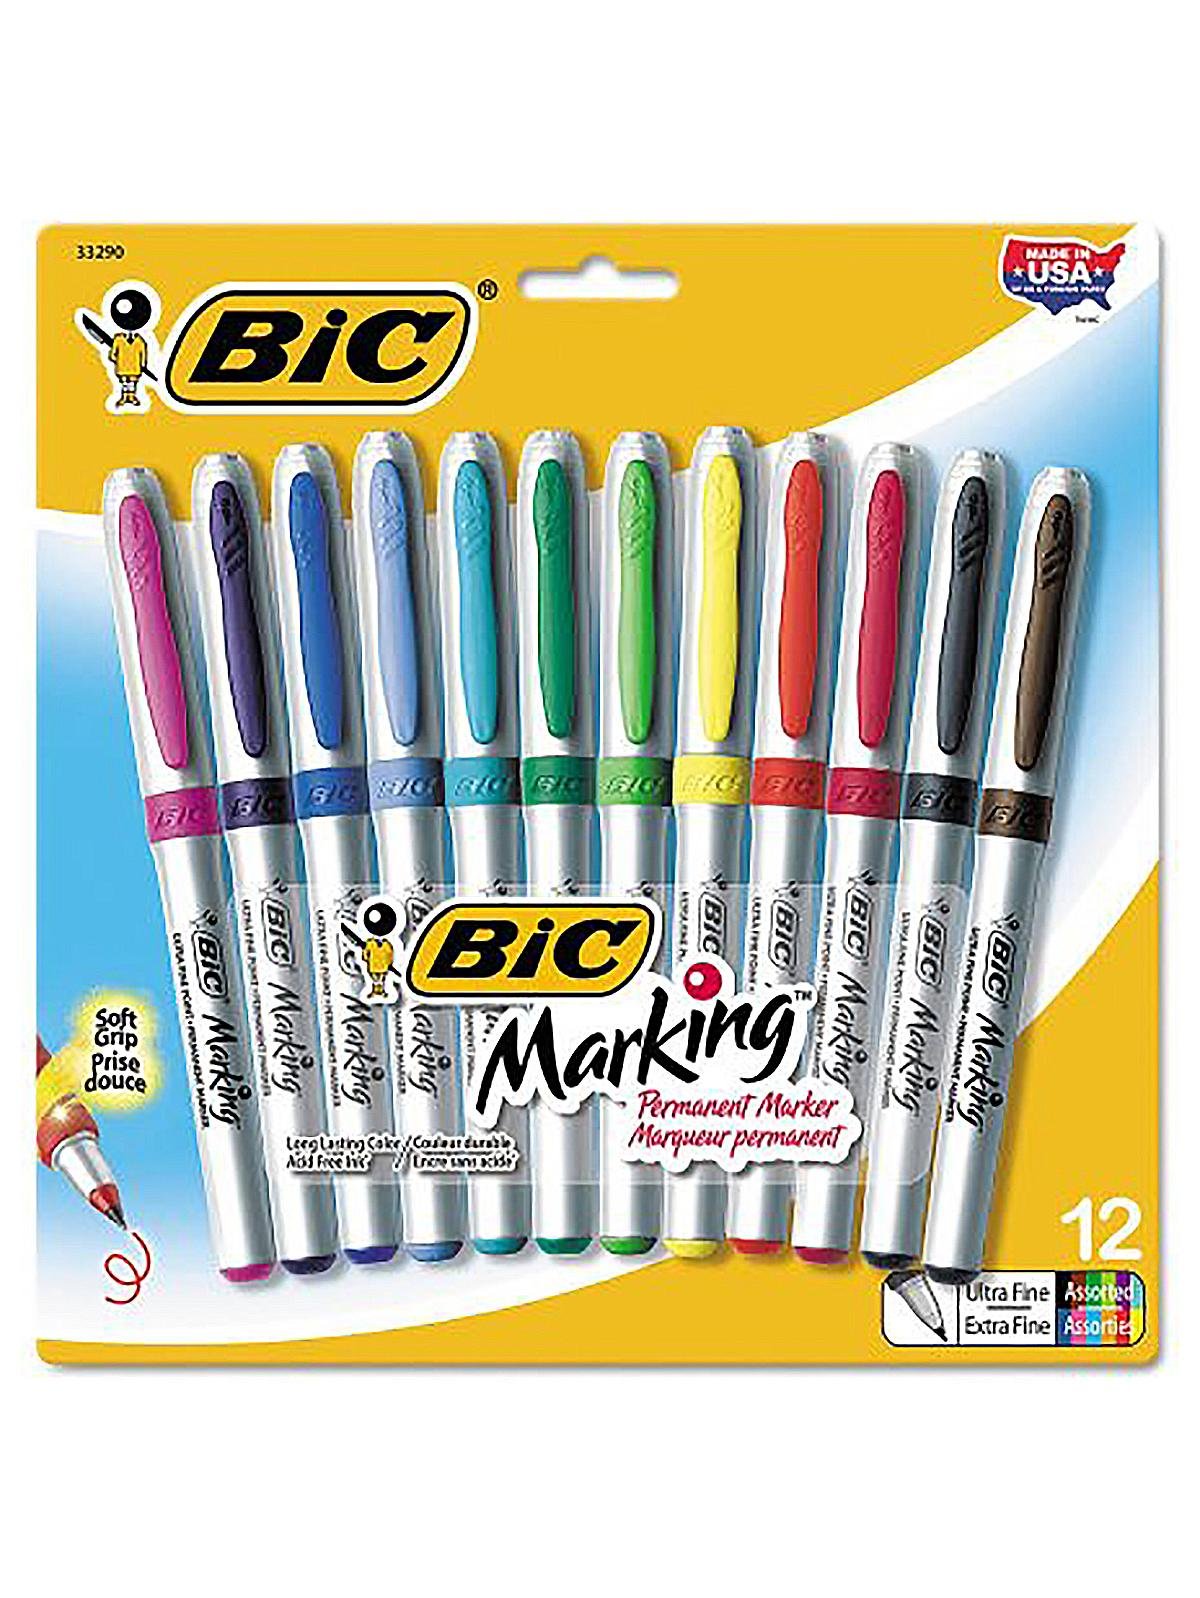 Bic Set of 36 Assorted Mark-It Fine Point Permanent Markers 